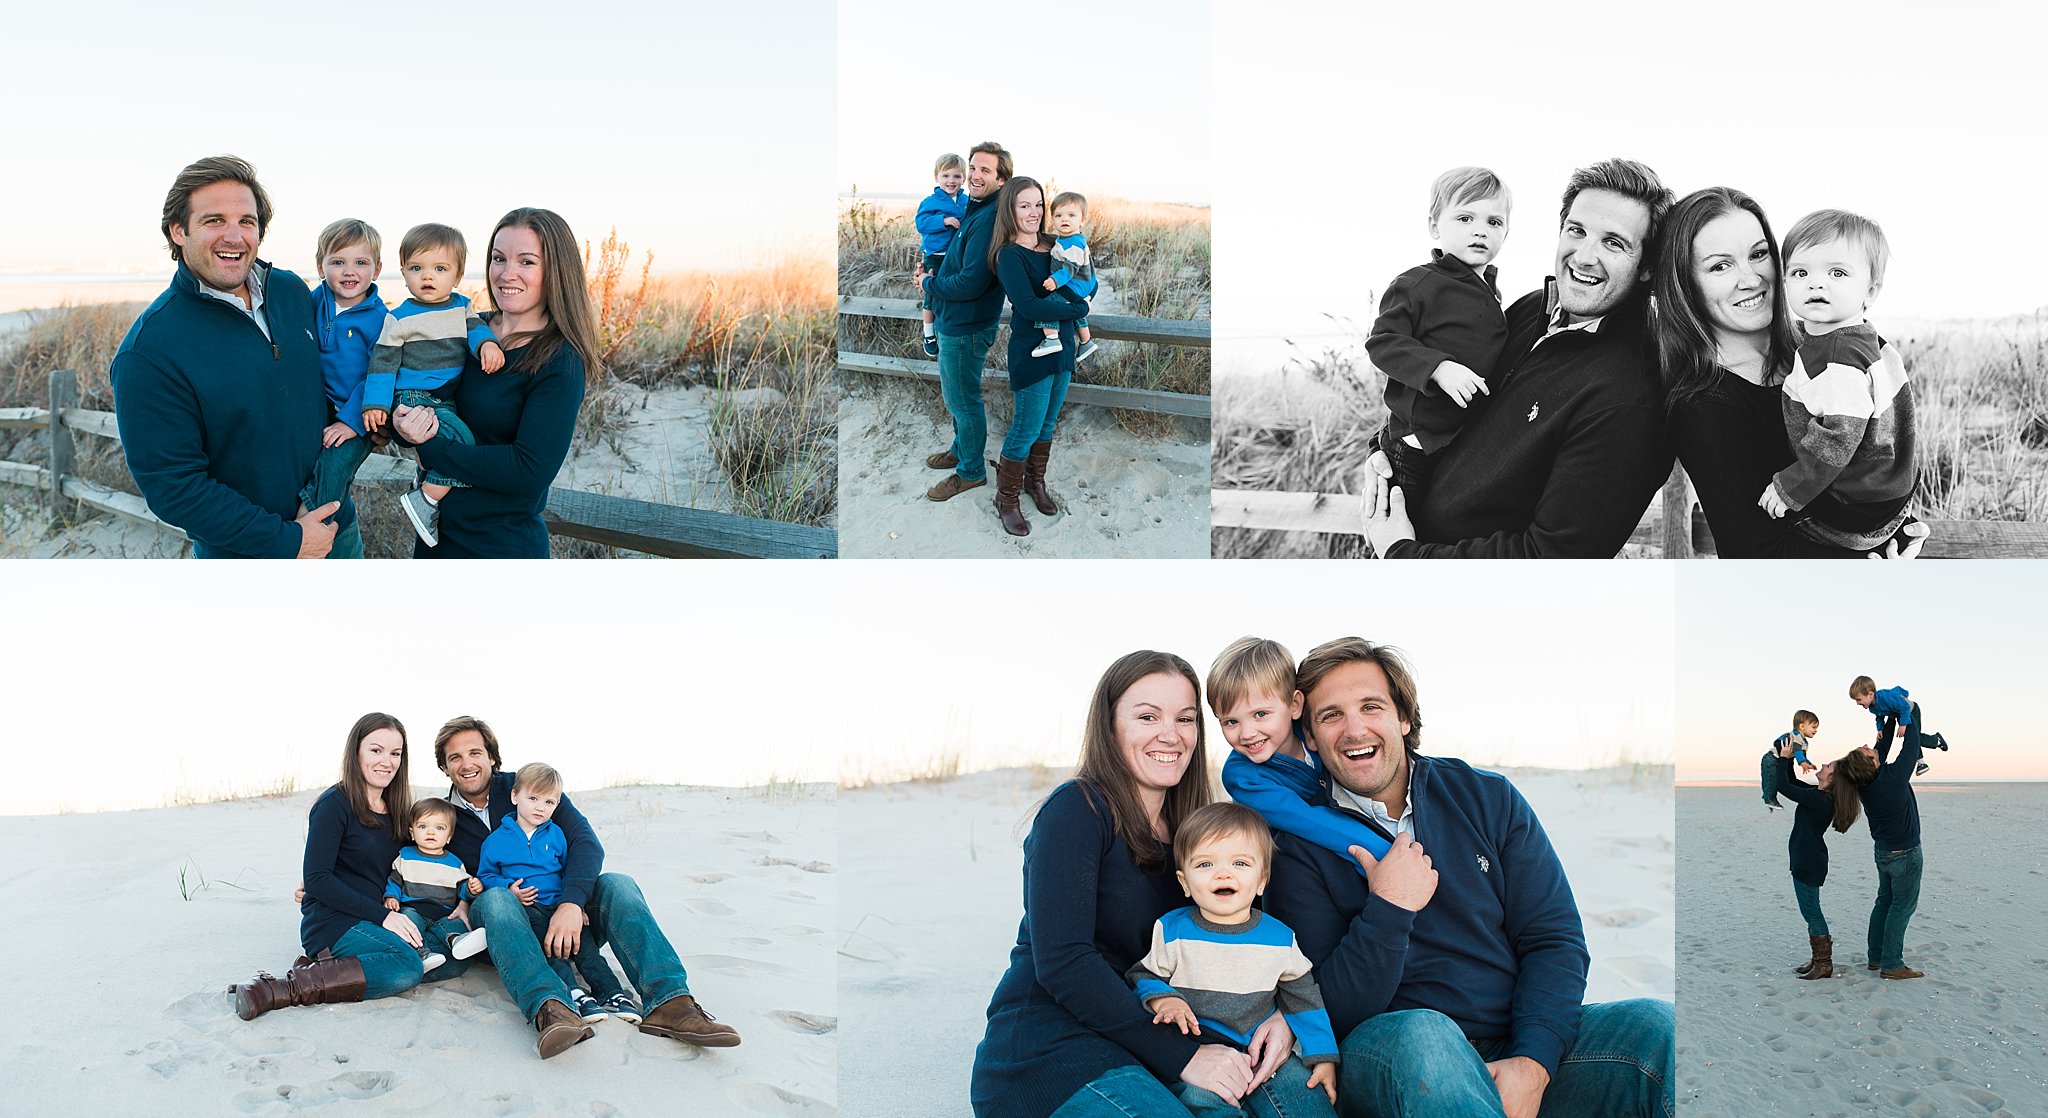 NJ family photographer capturing beach portraits in the winter and for holidays